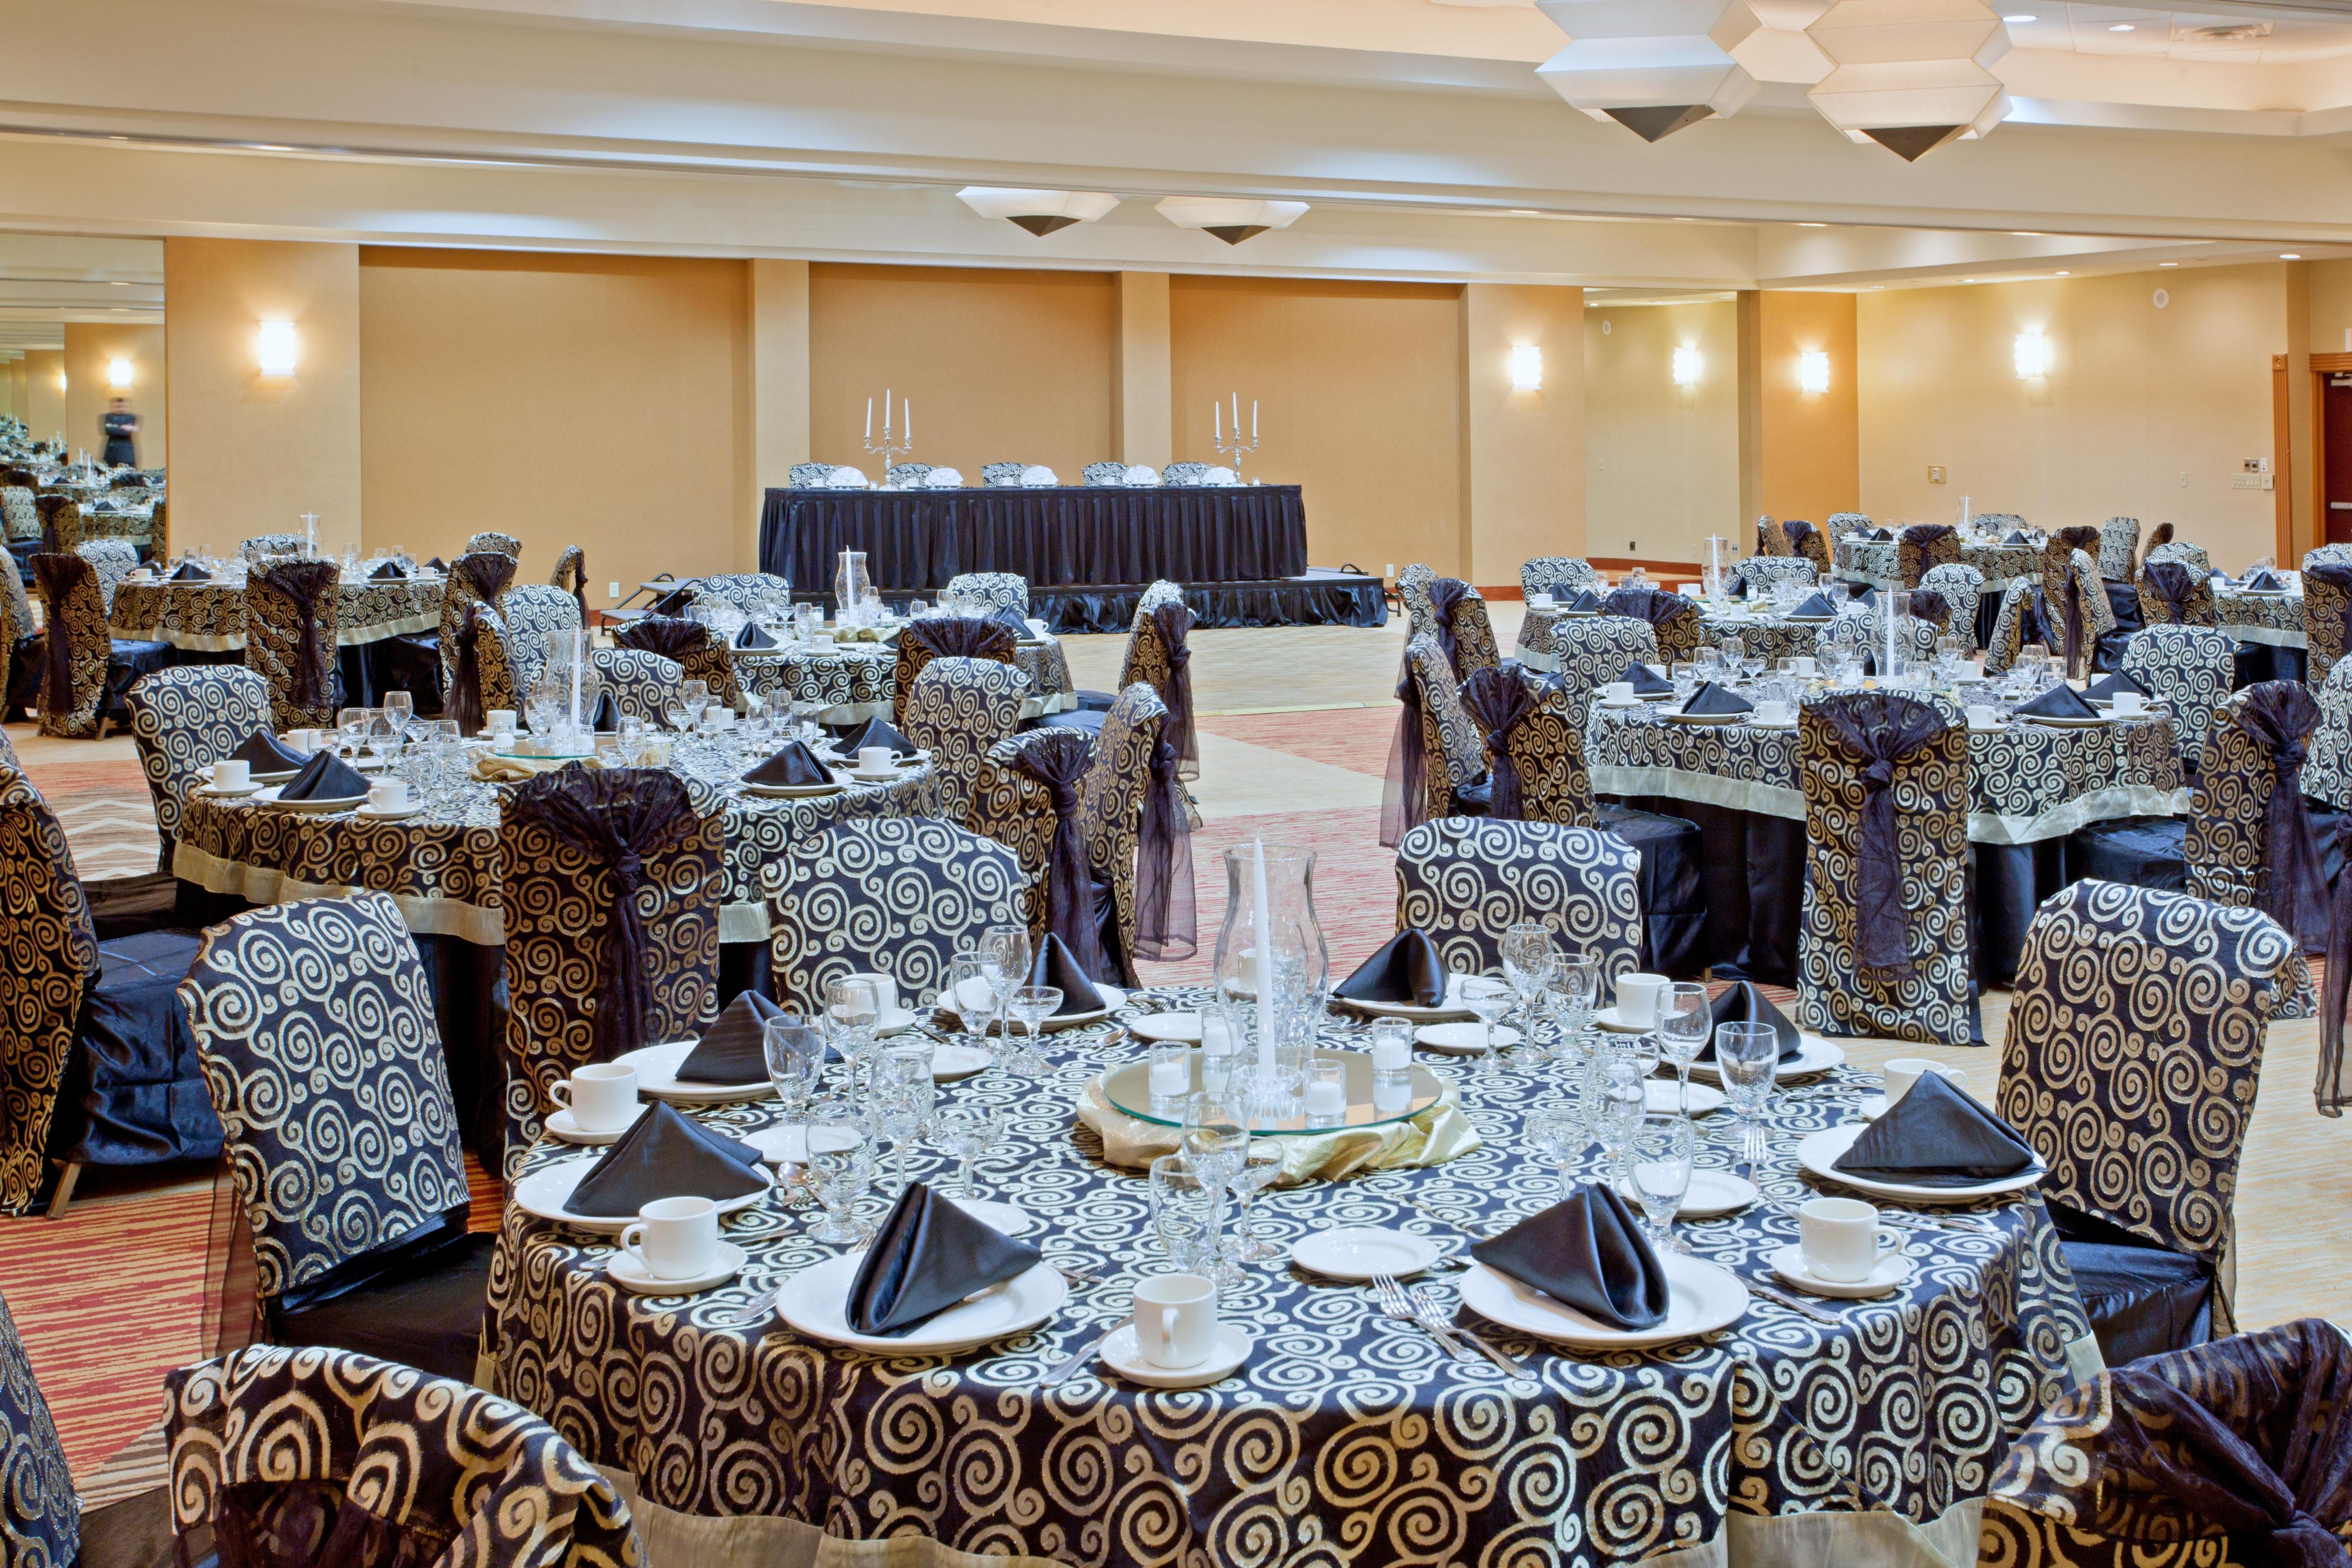 Our ballroom is the perfect venue for banquets and weddings.